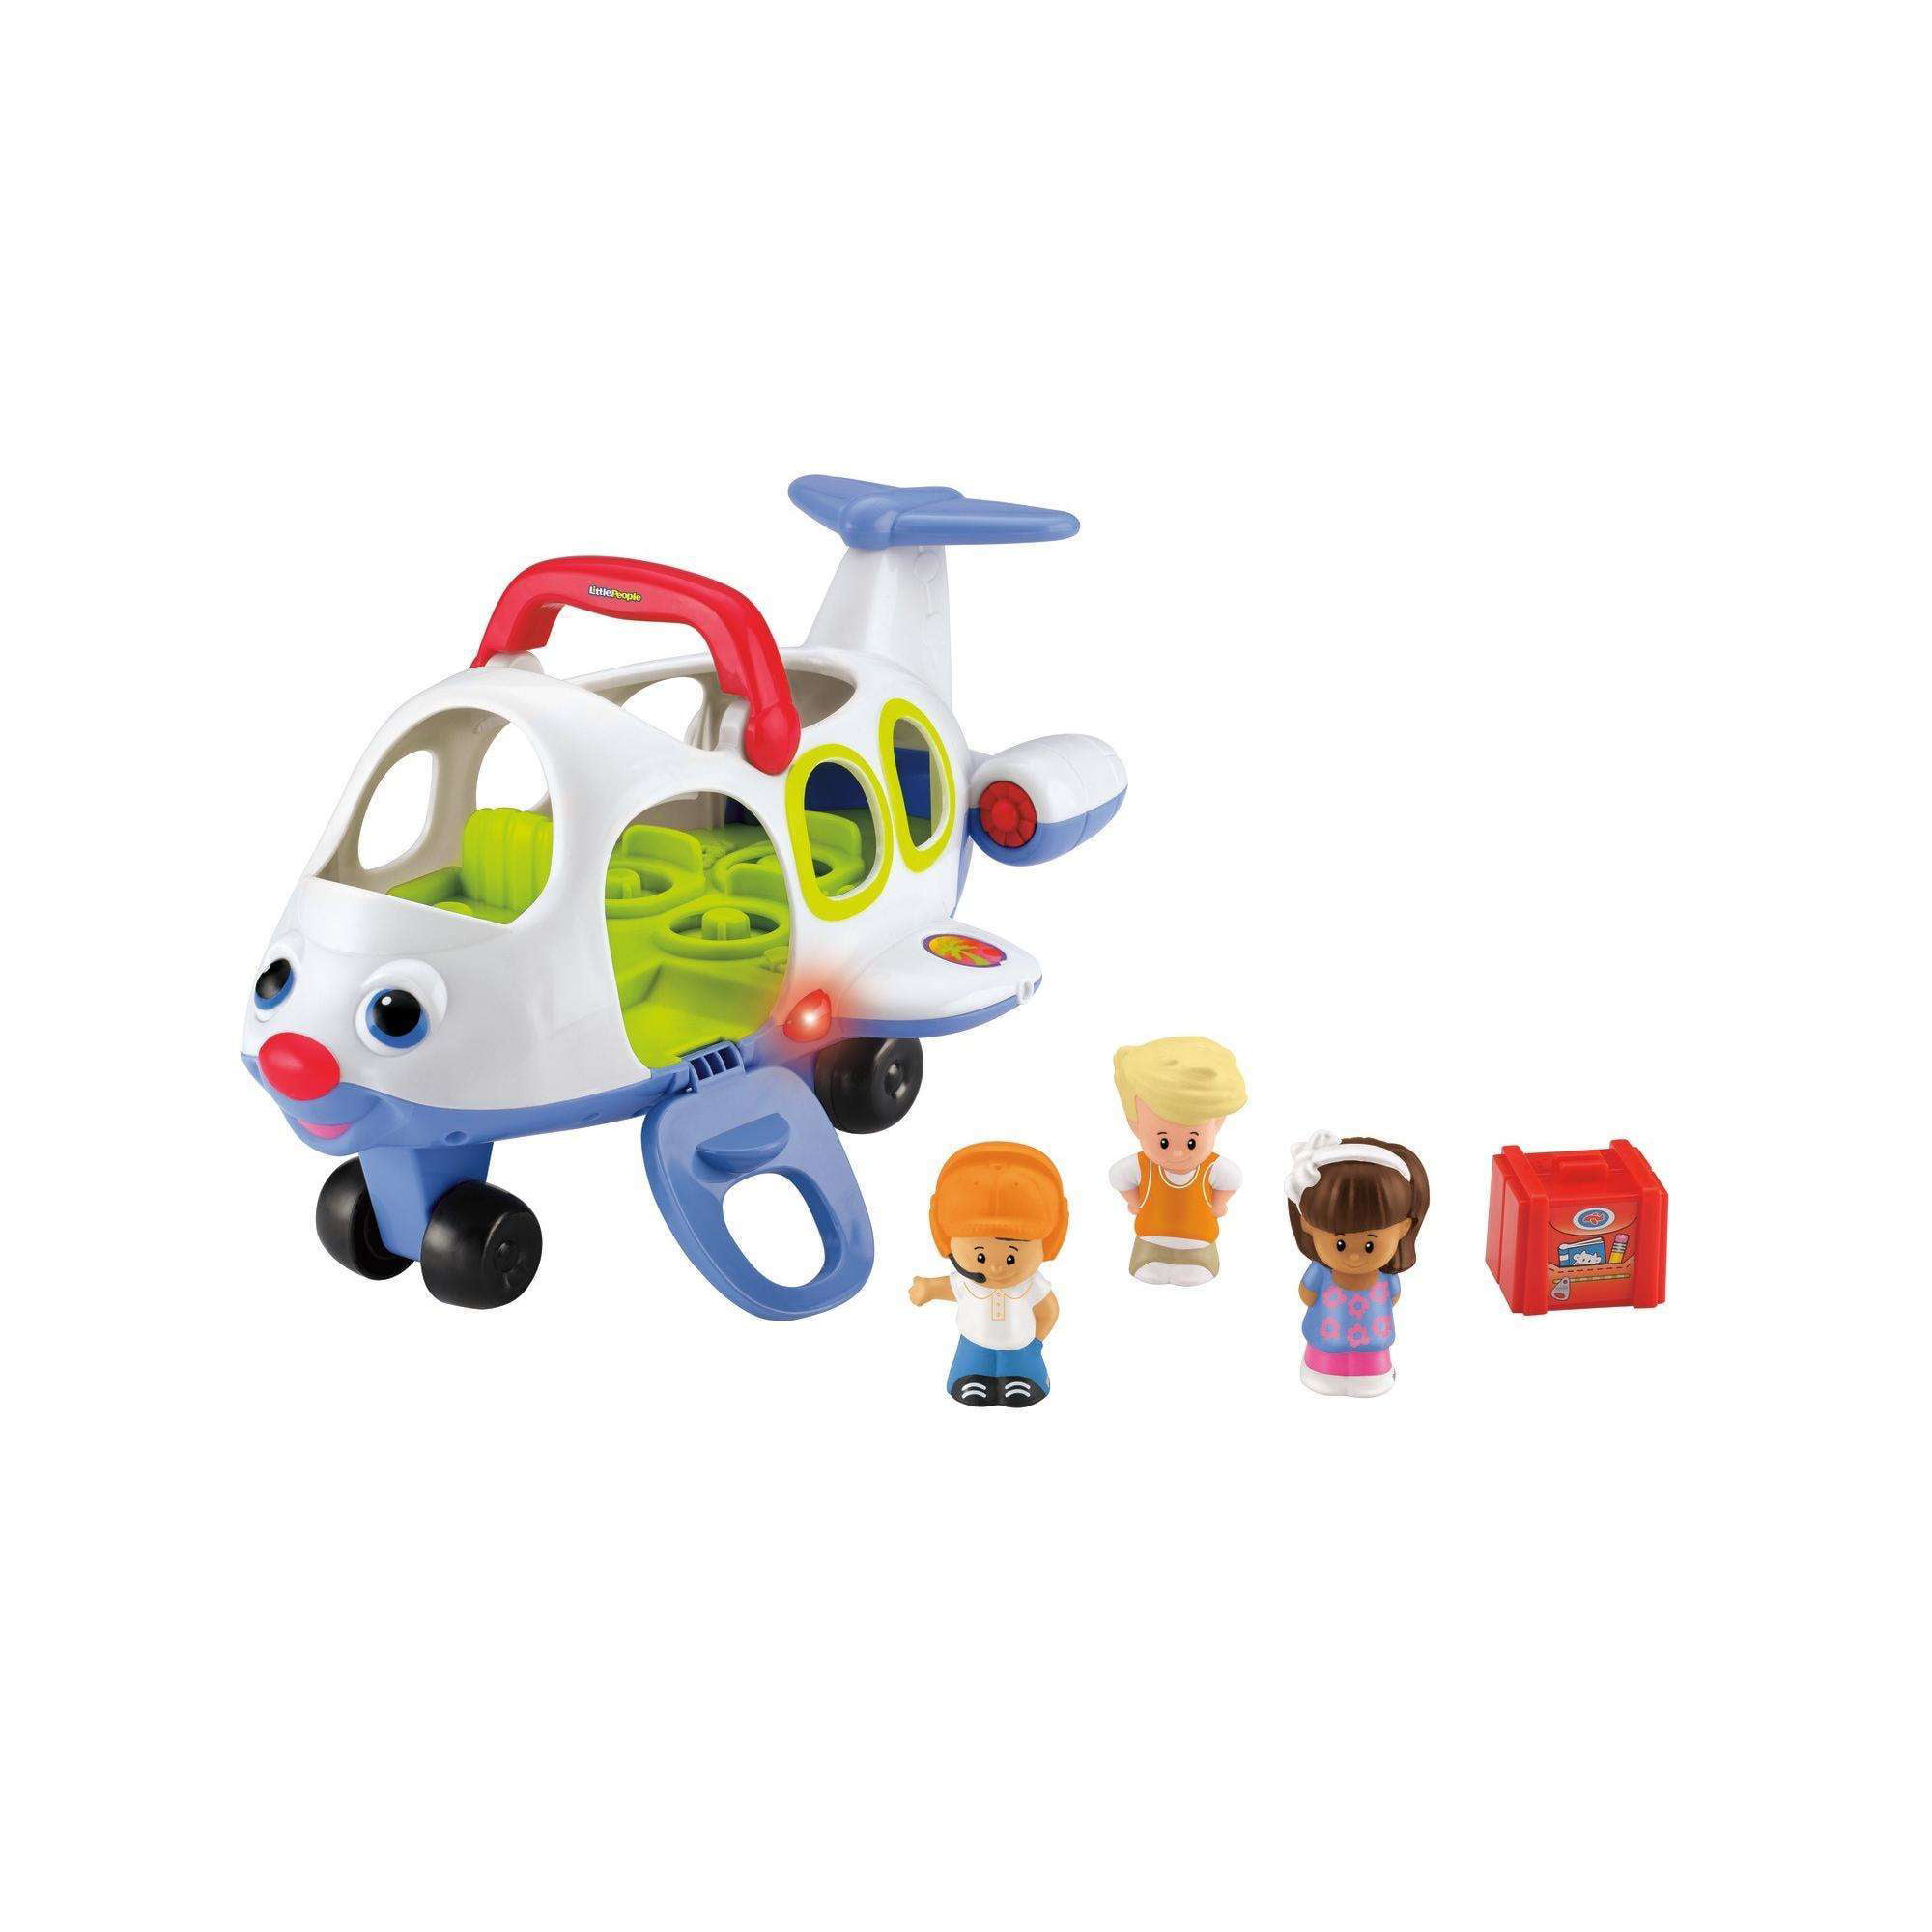 Details about   Fisher Price Little People Lil Movers Airplane Jet Luggage Lights Sounds Figures 